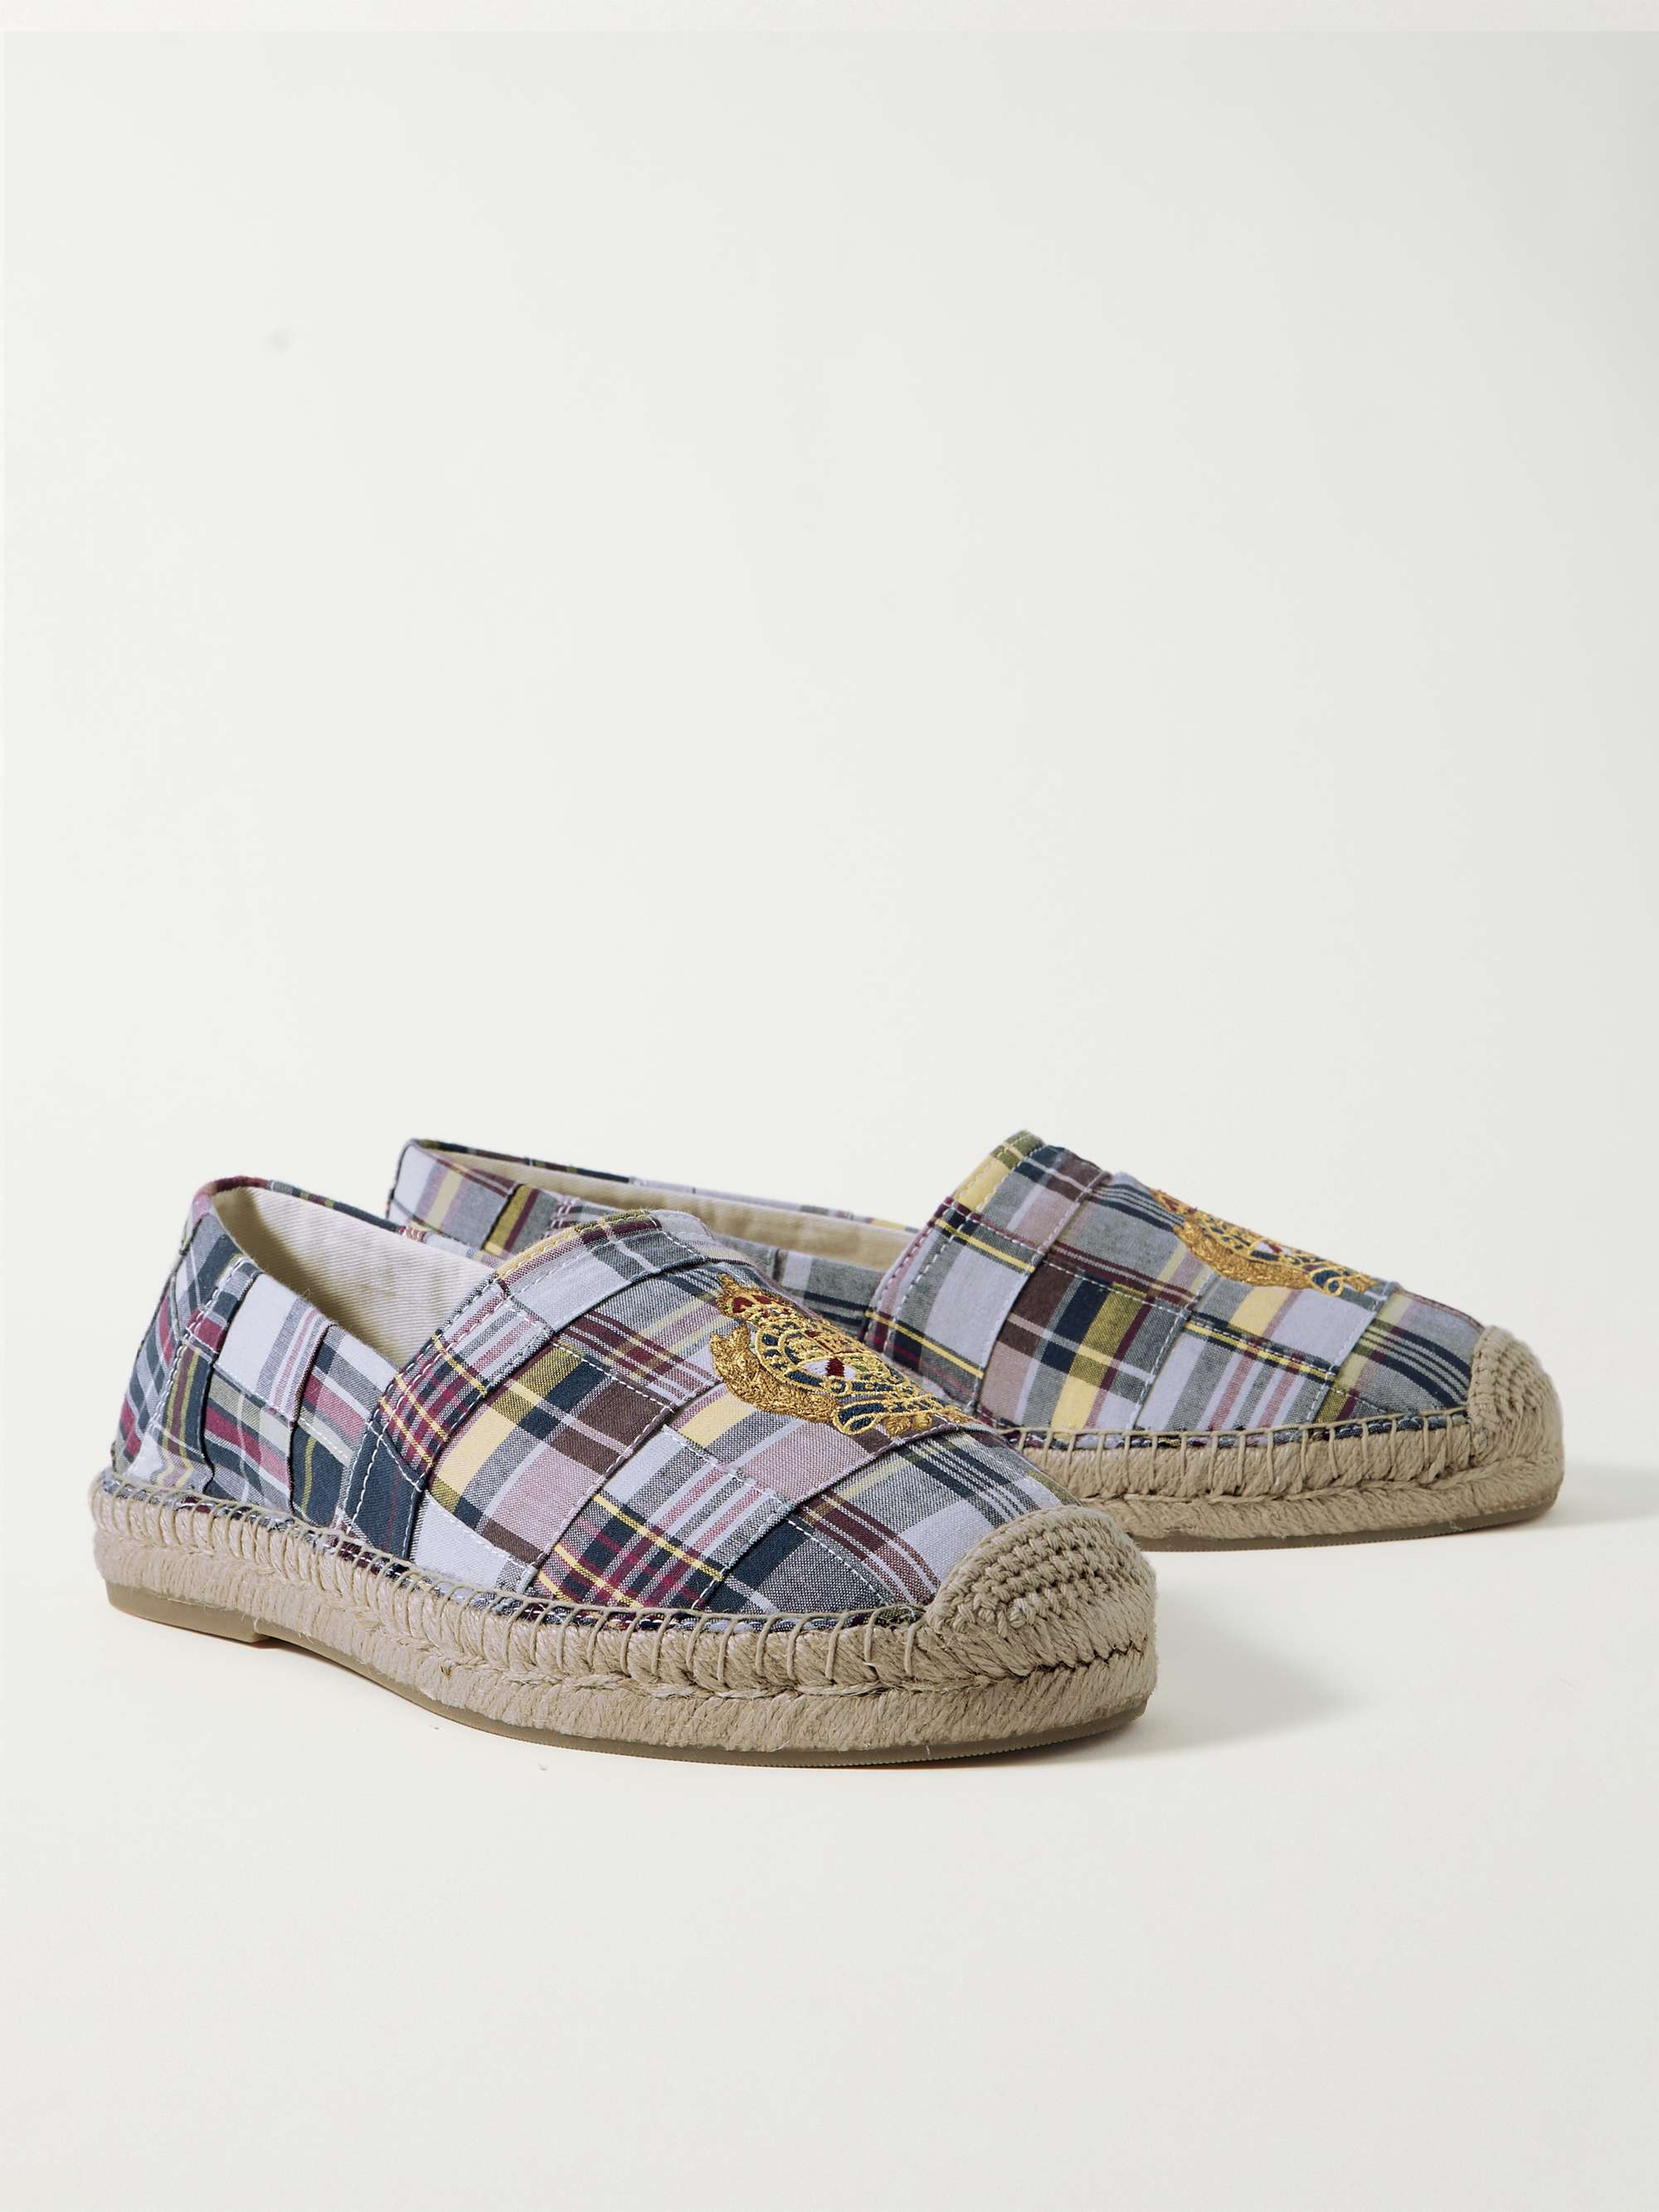 POLO RALPH LAUREN Logo-Embroidered Patchwork Checked Canvas Espadrilles